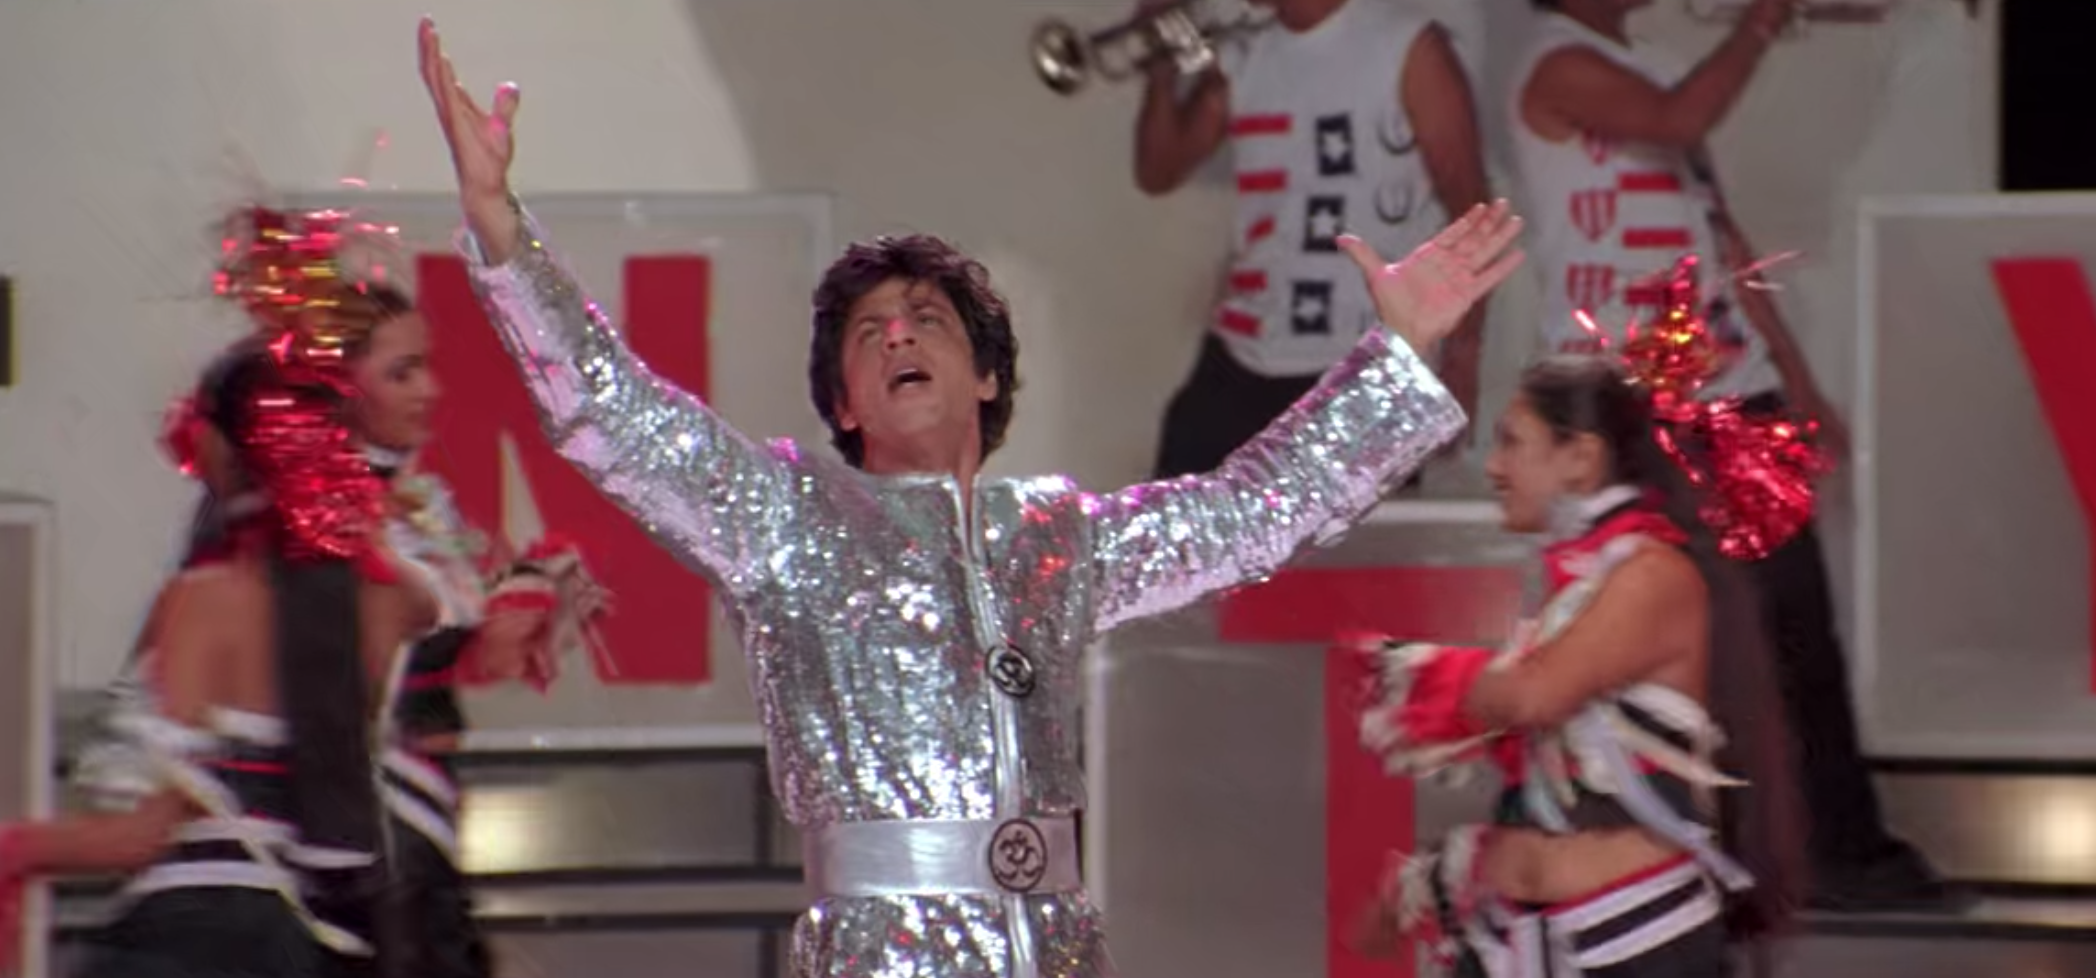 Om wears a sparkly silver jumpsuit as dancers run behind him.